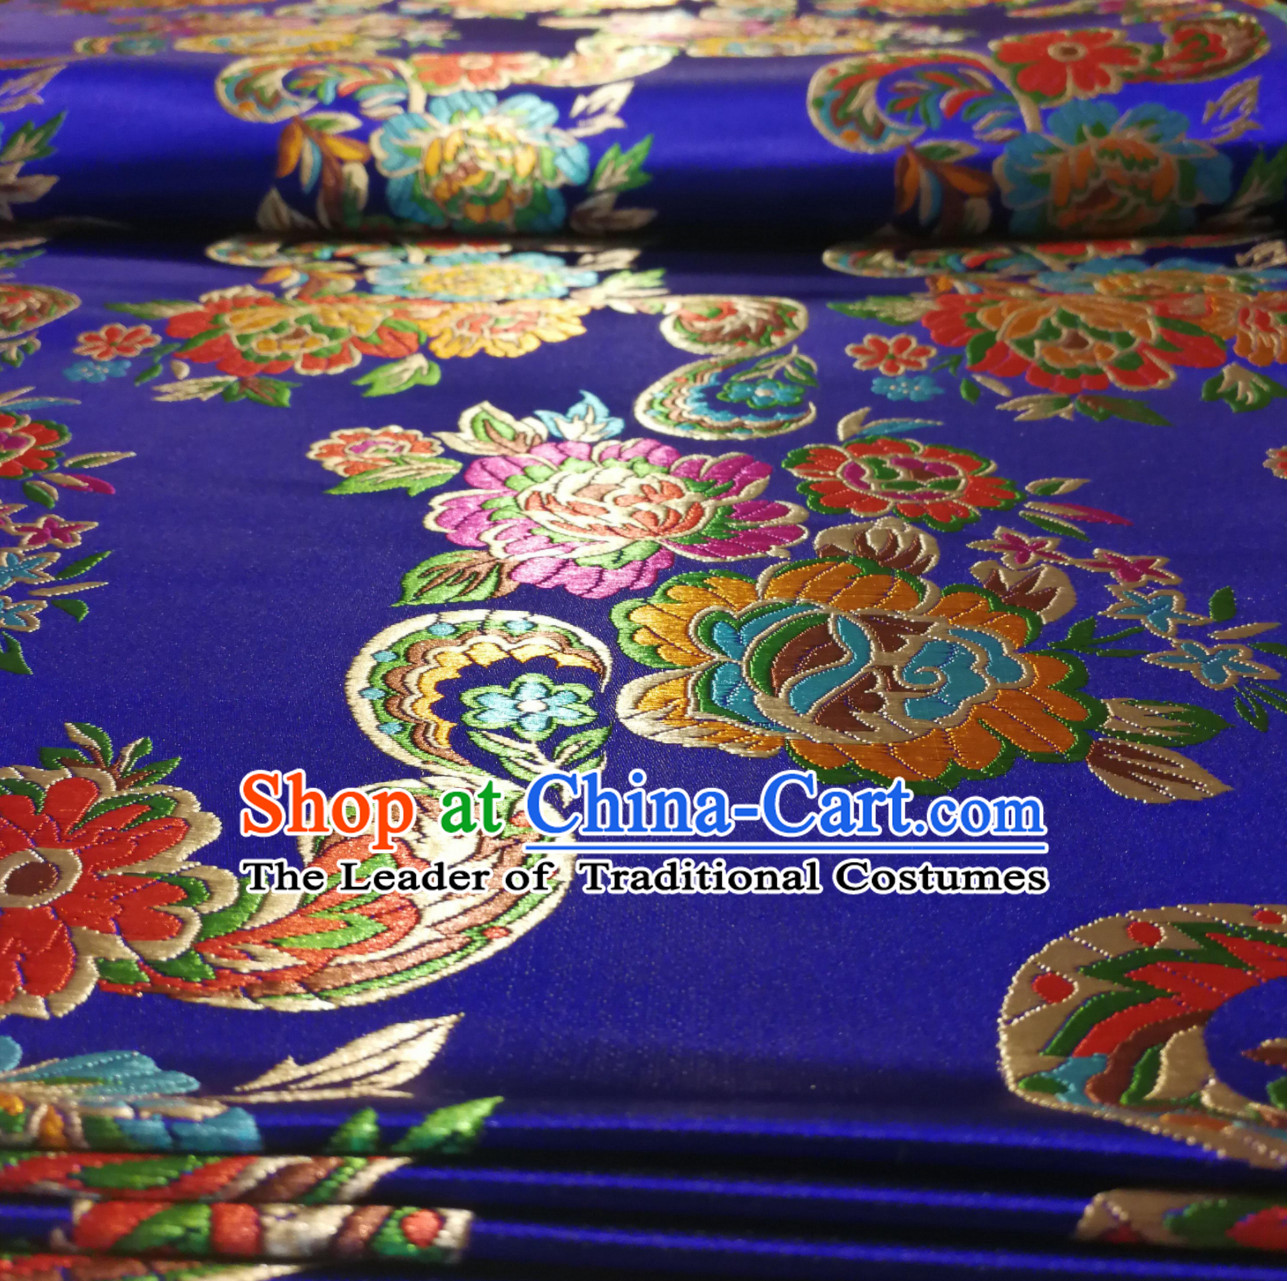 Royal Blue Color Chinese Royal Palace Style Traditional Flower Peony Pattern Design Brocade Fabric Silk Fabric Chinese Fabric Asian Material